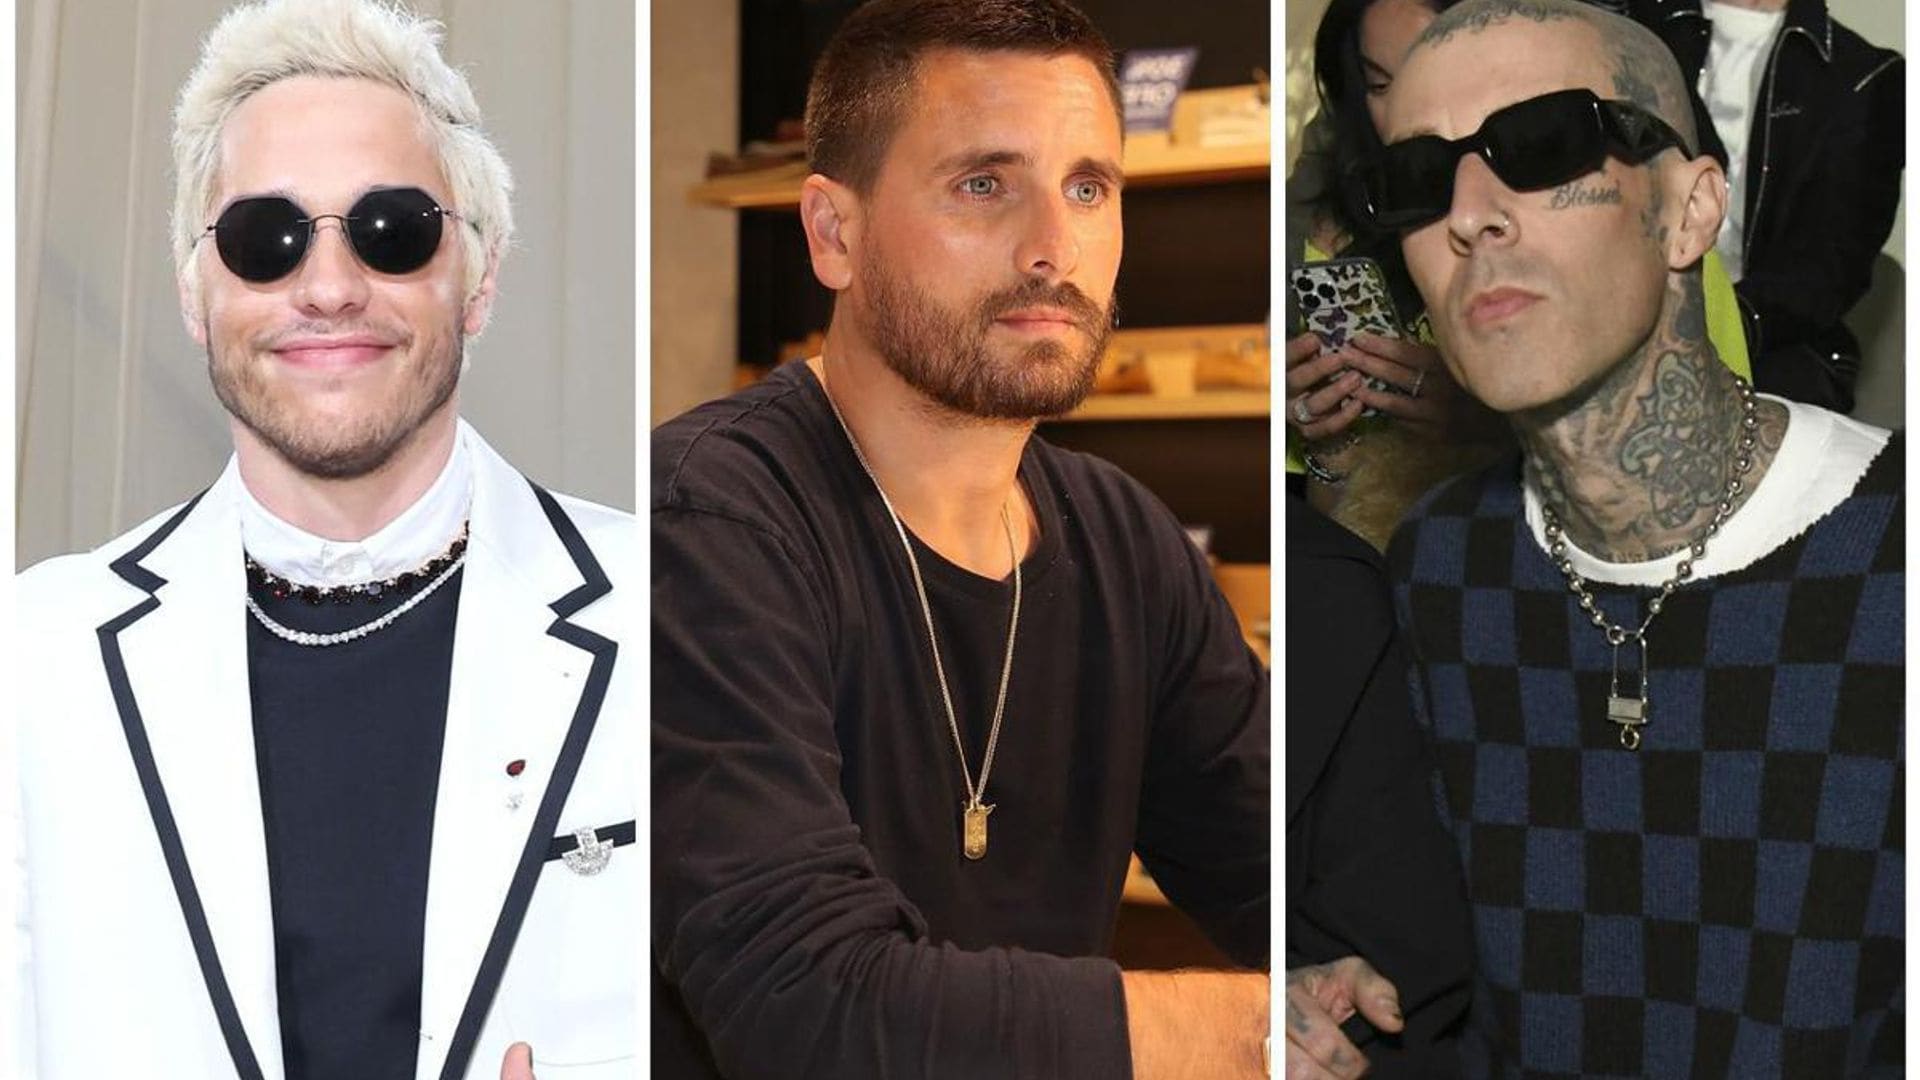 Scott Disick is bonding with Pete Davidson and is ‘cordial’ Travis Barker